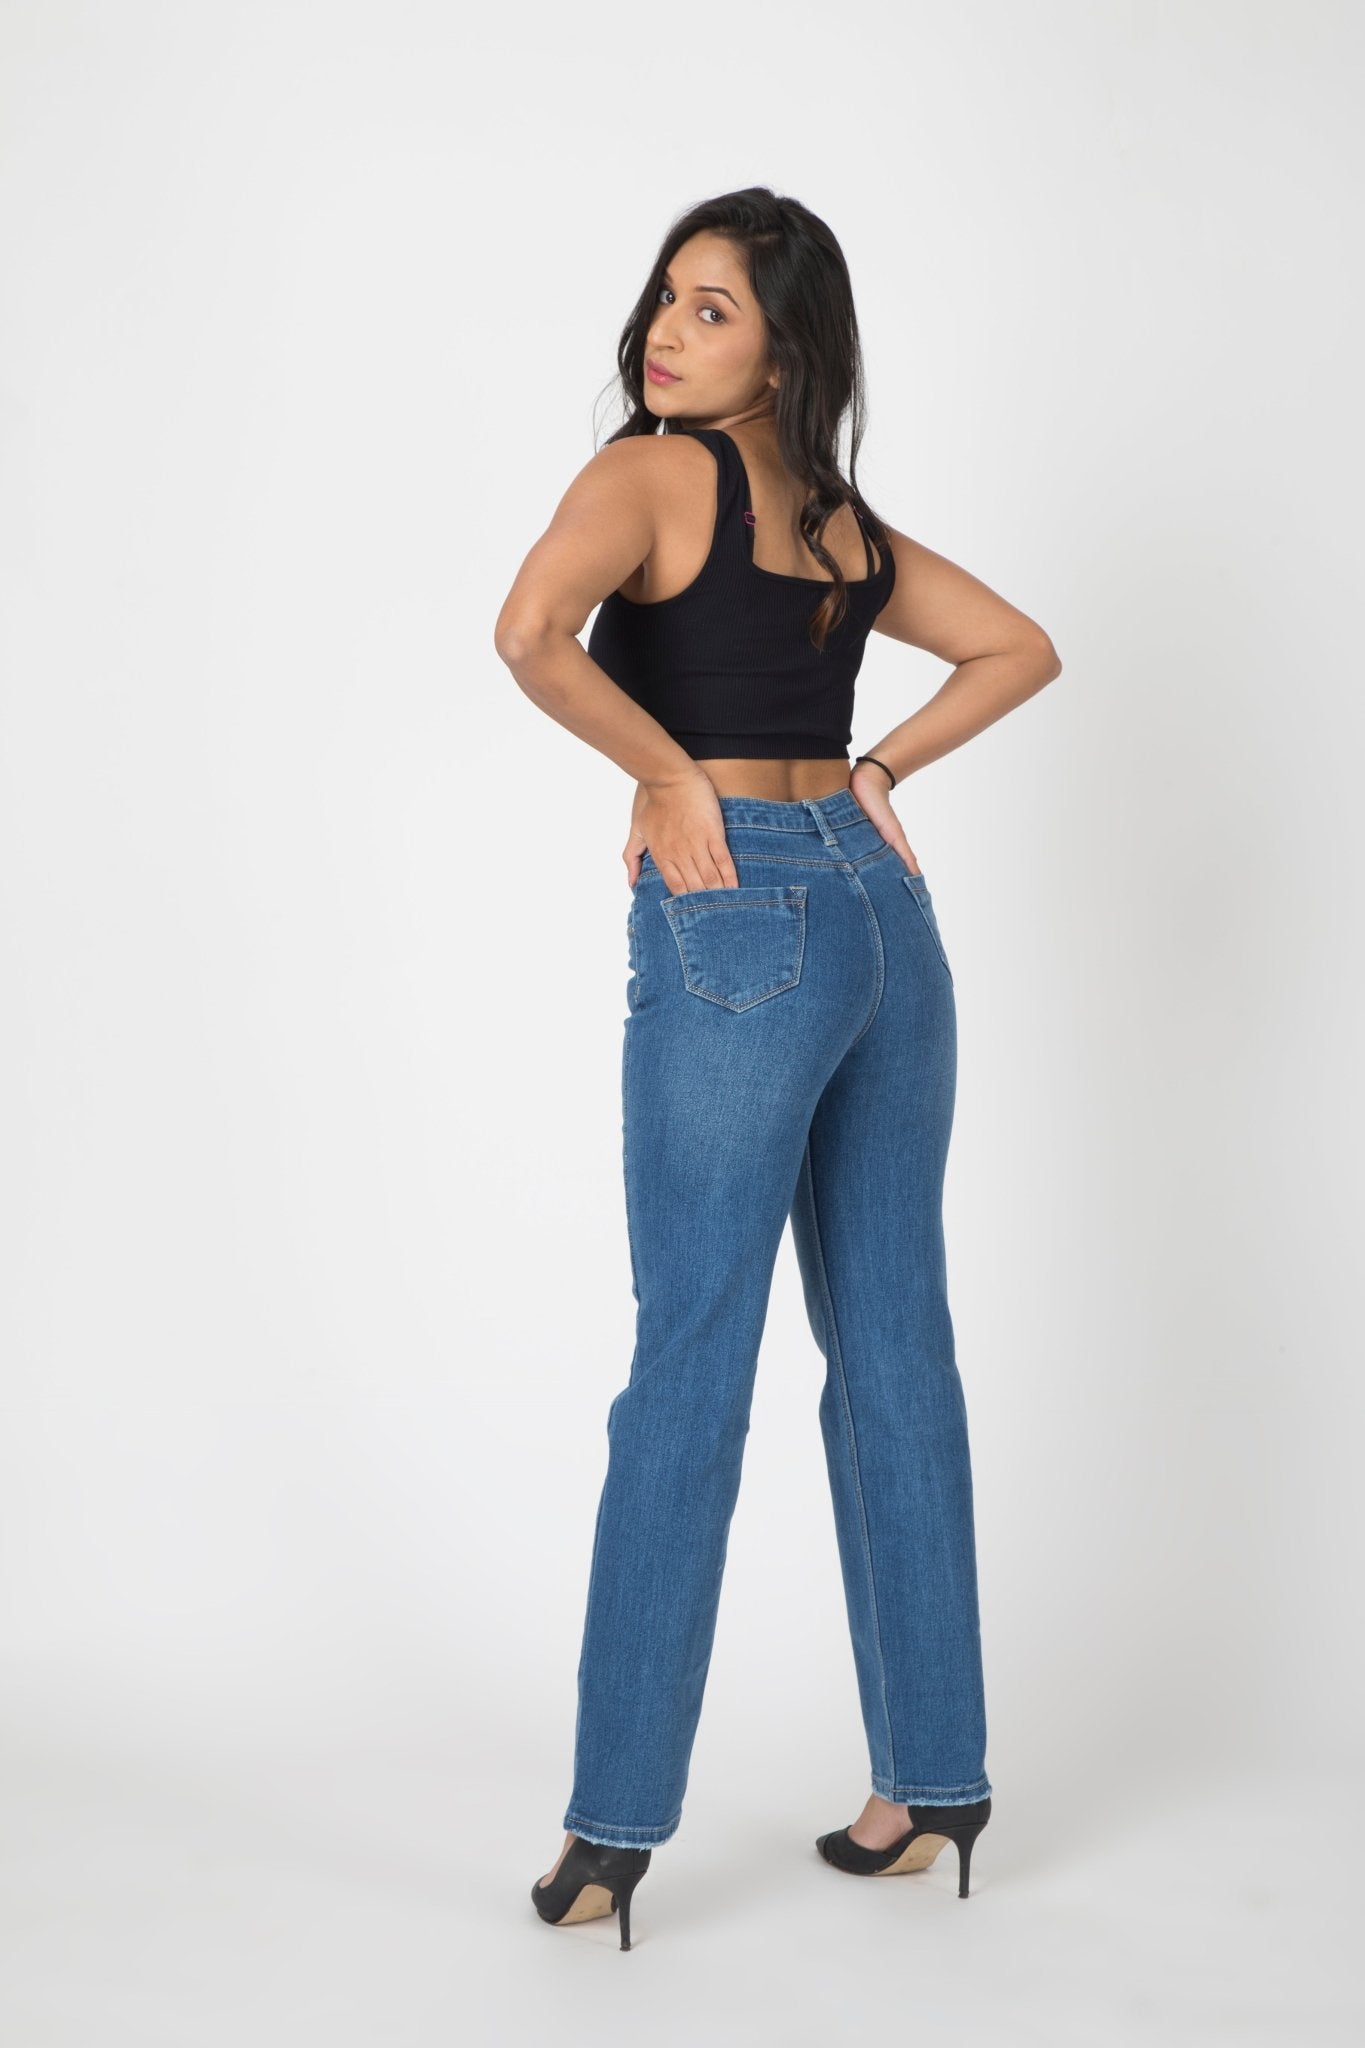 Stone Blue Straight Fit Jeans. Classic and Chic Look